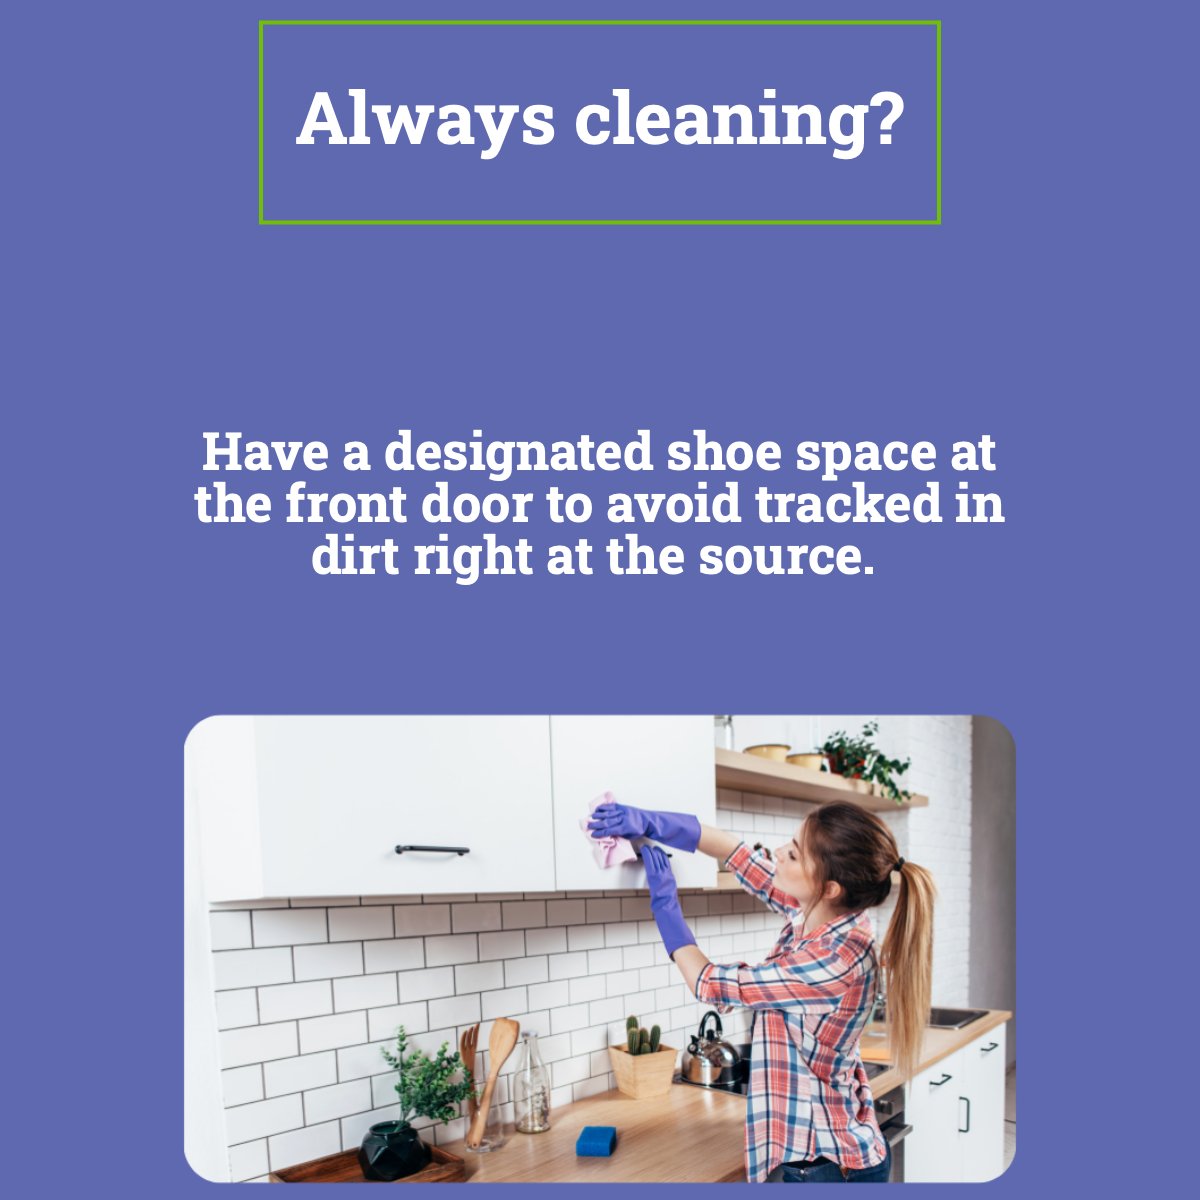 If you are tired of cleaning all the time, try this tip! 💡

#cleaningtips #cleanhouse #cleaninghacks #cleanhome
 #housesforsalenearme #houses4salenearme #Eaganrealtors #bilingualrealtors